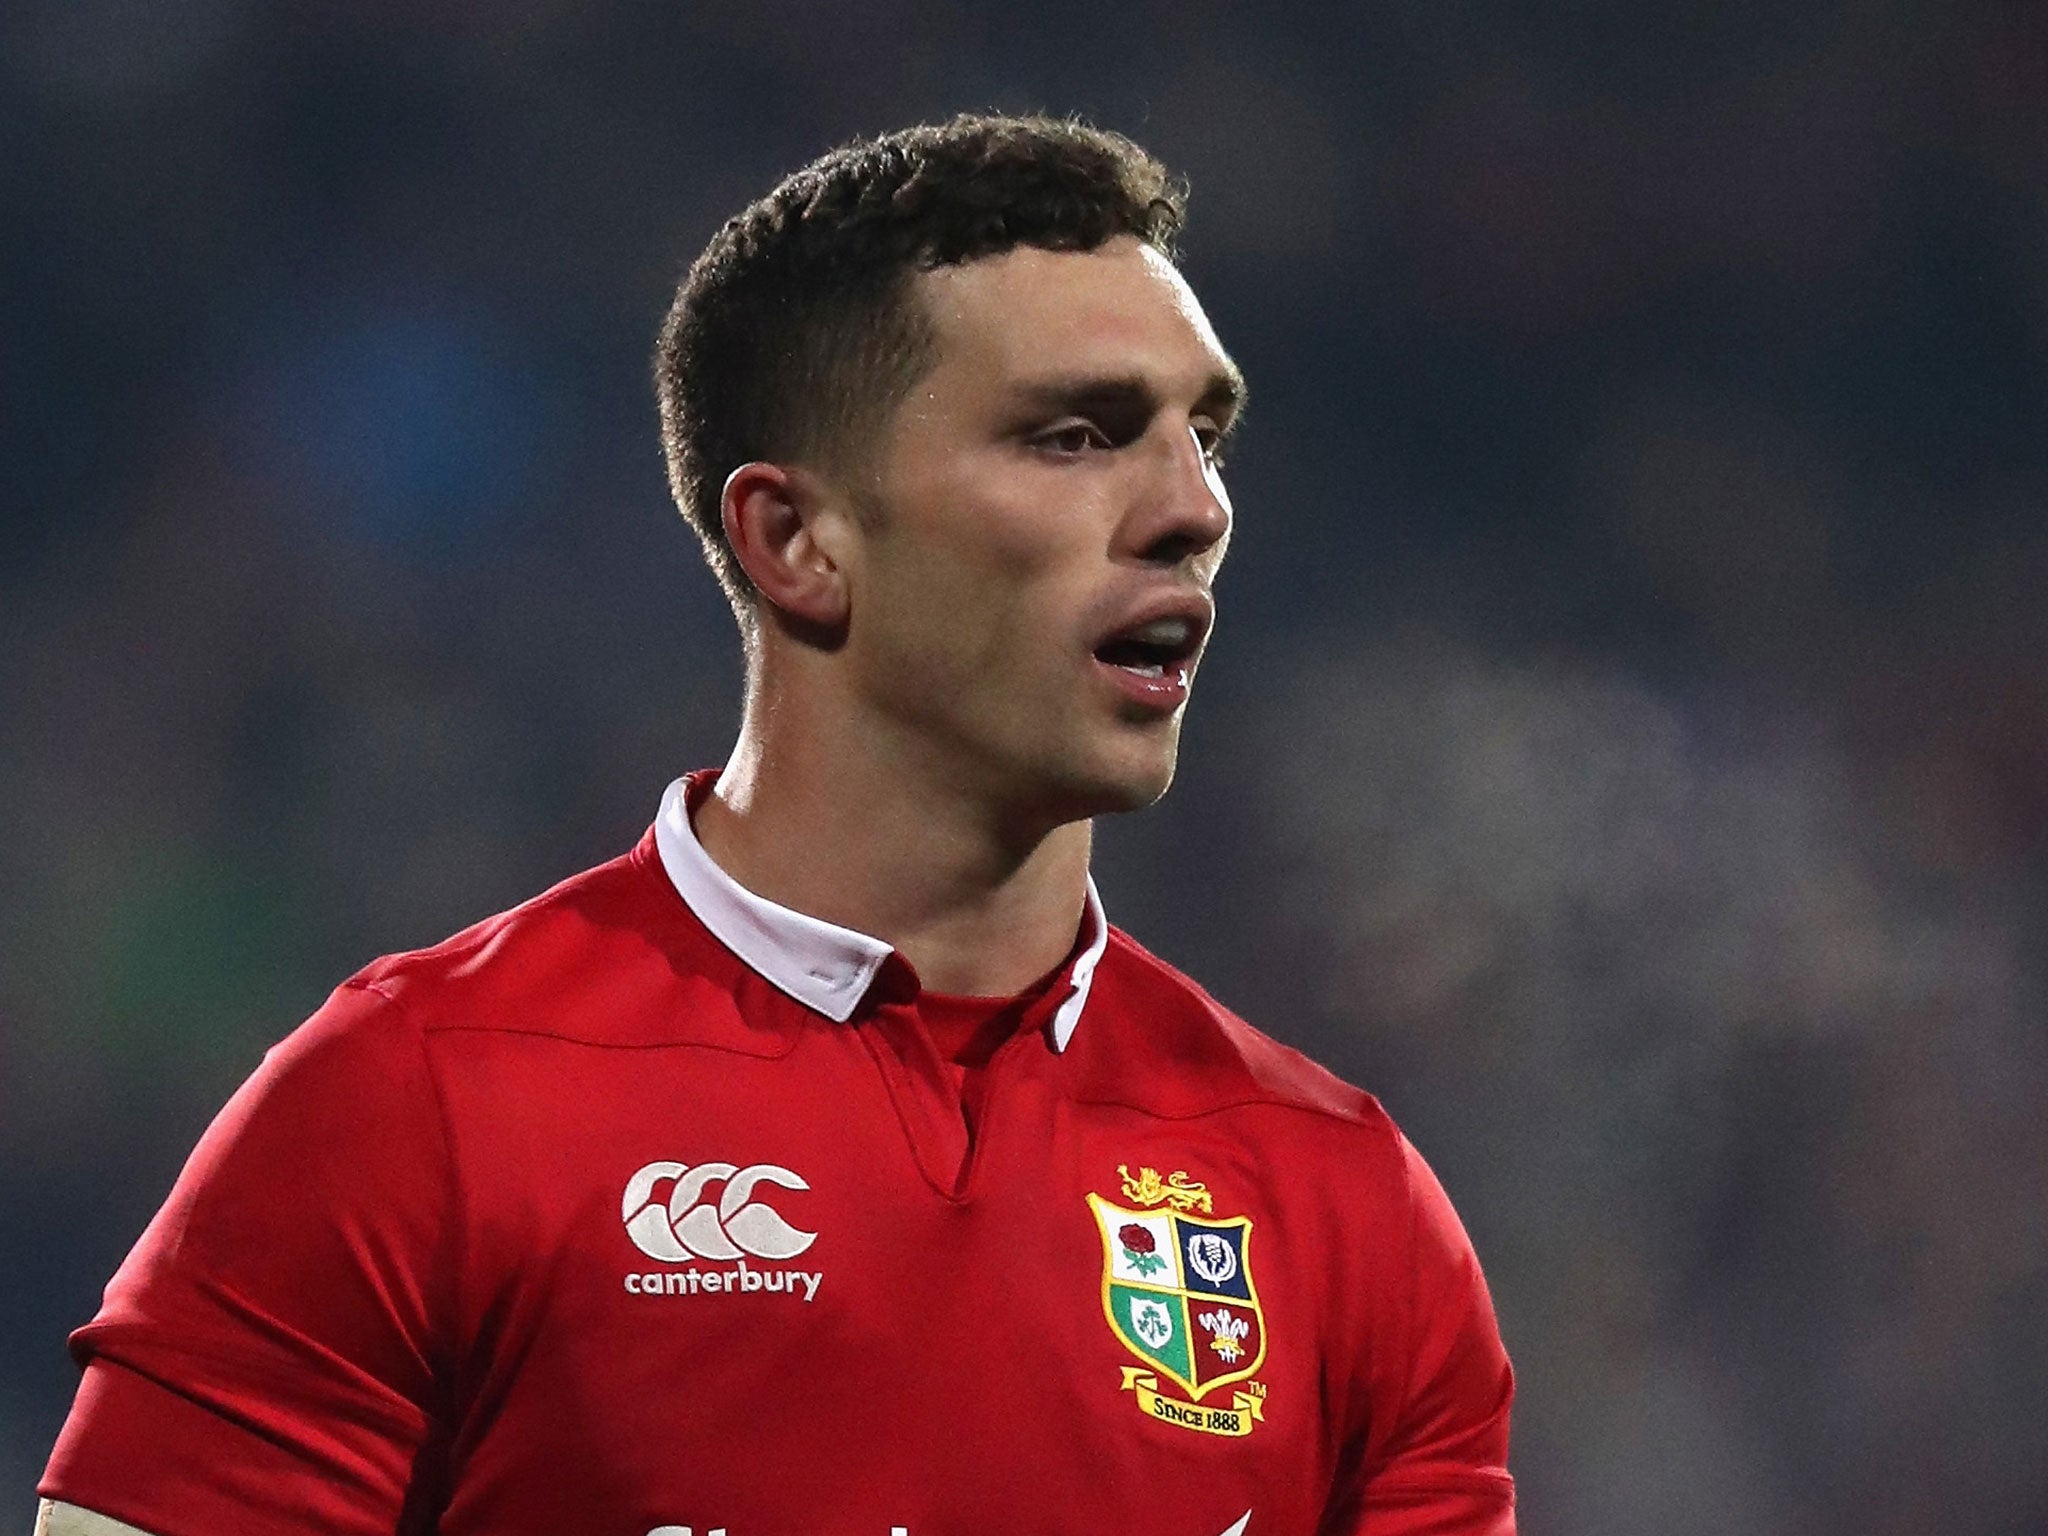 George North has been ruled out of the remainder of the British and Irish Lions tour